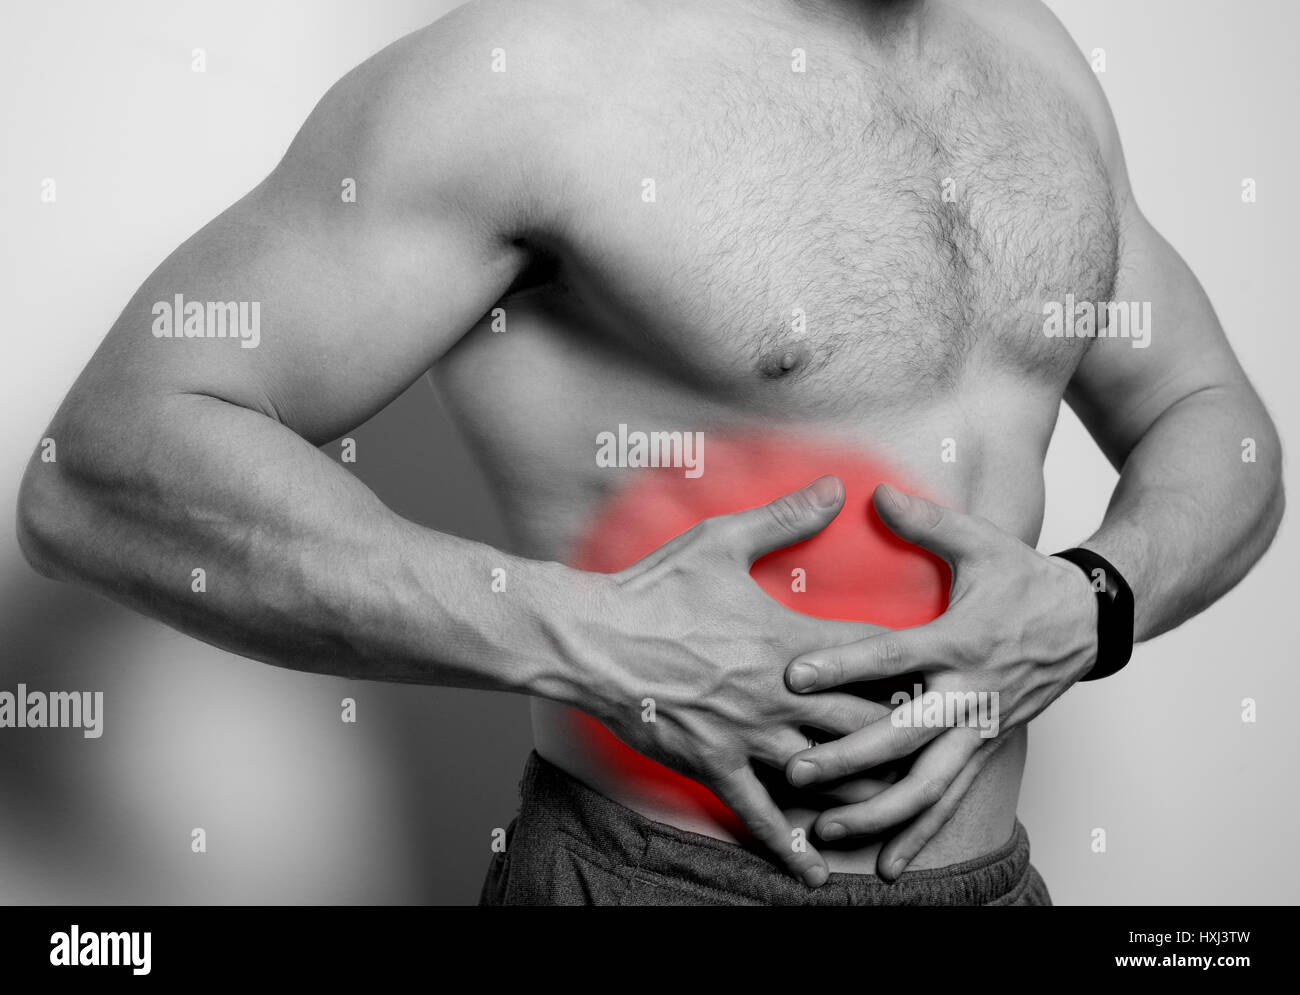 pain in the liver area Stock Photo